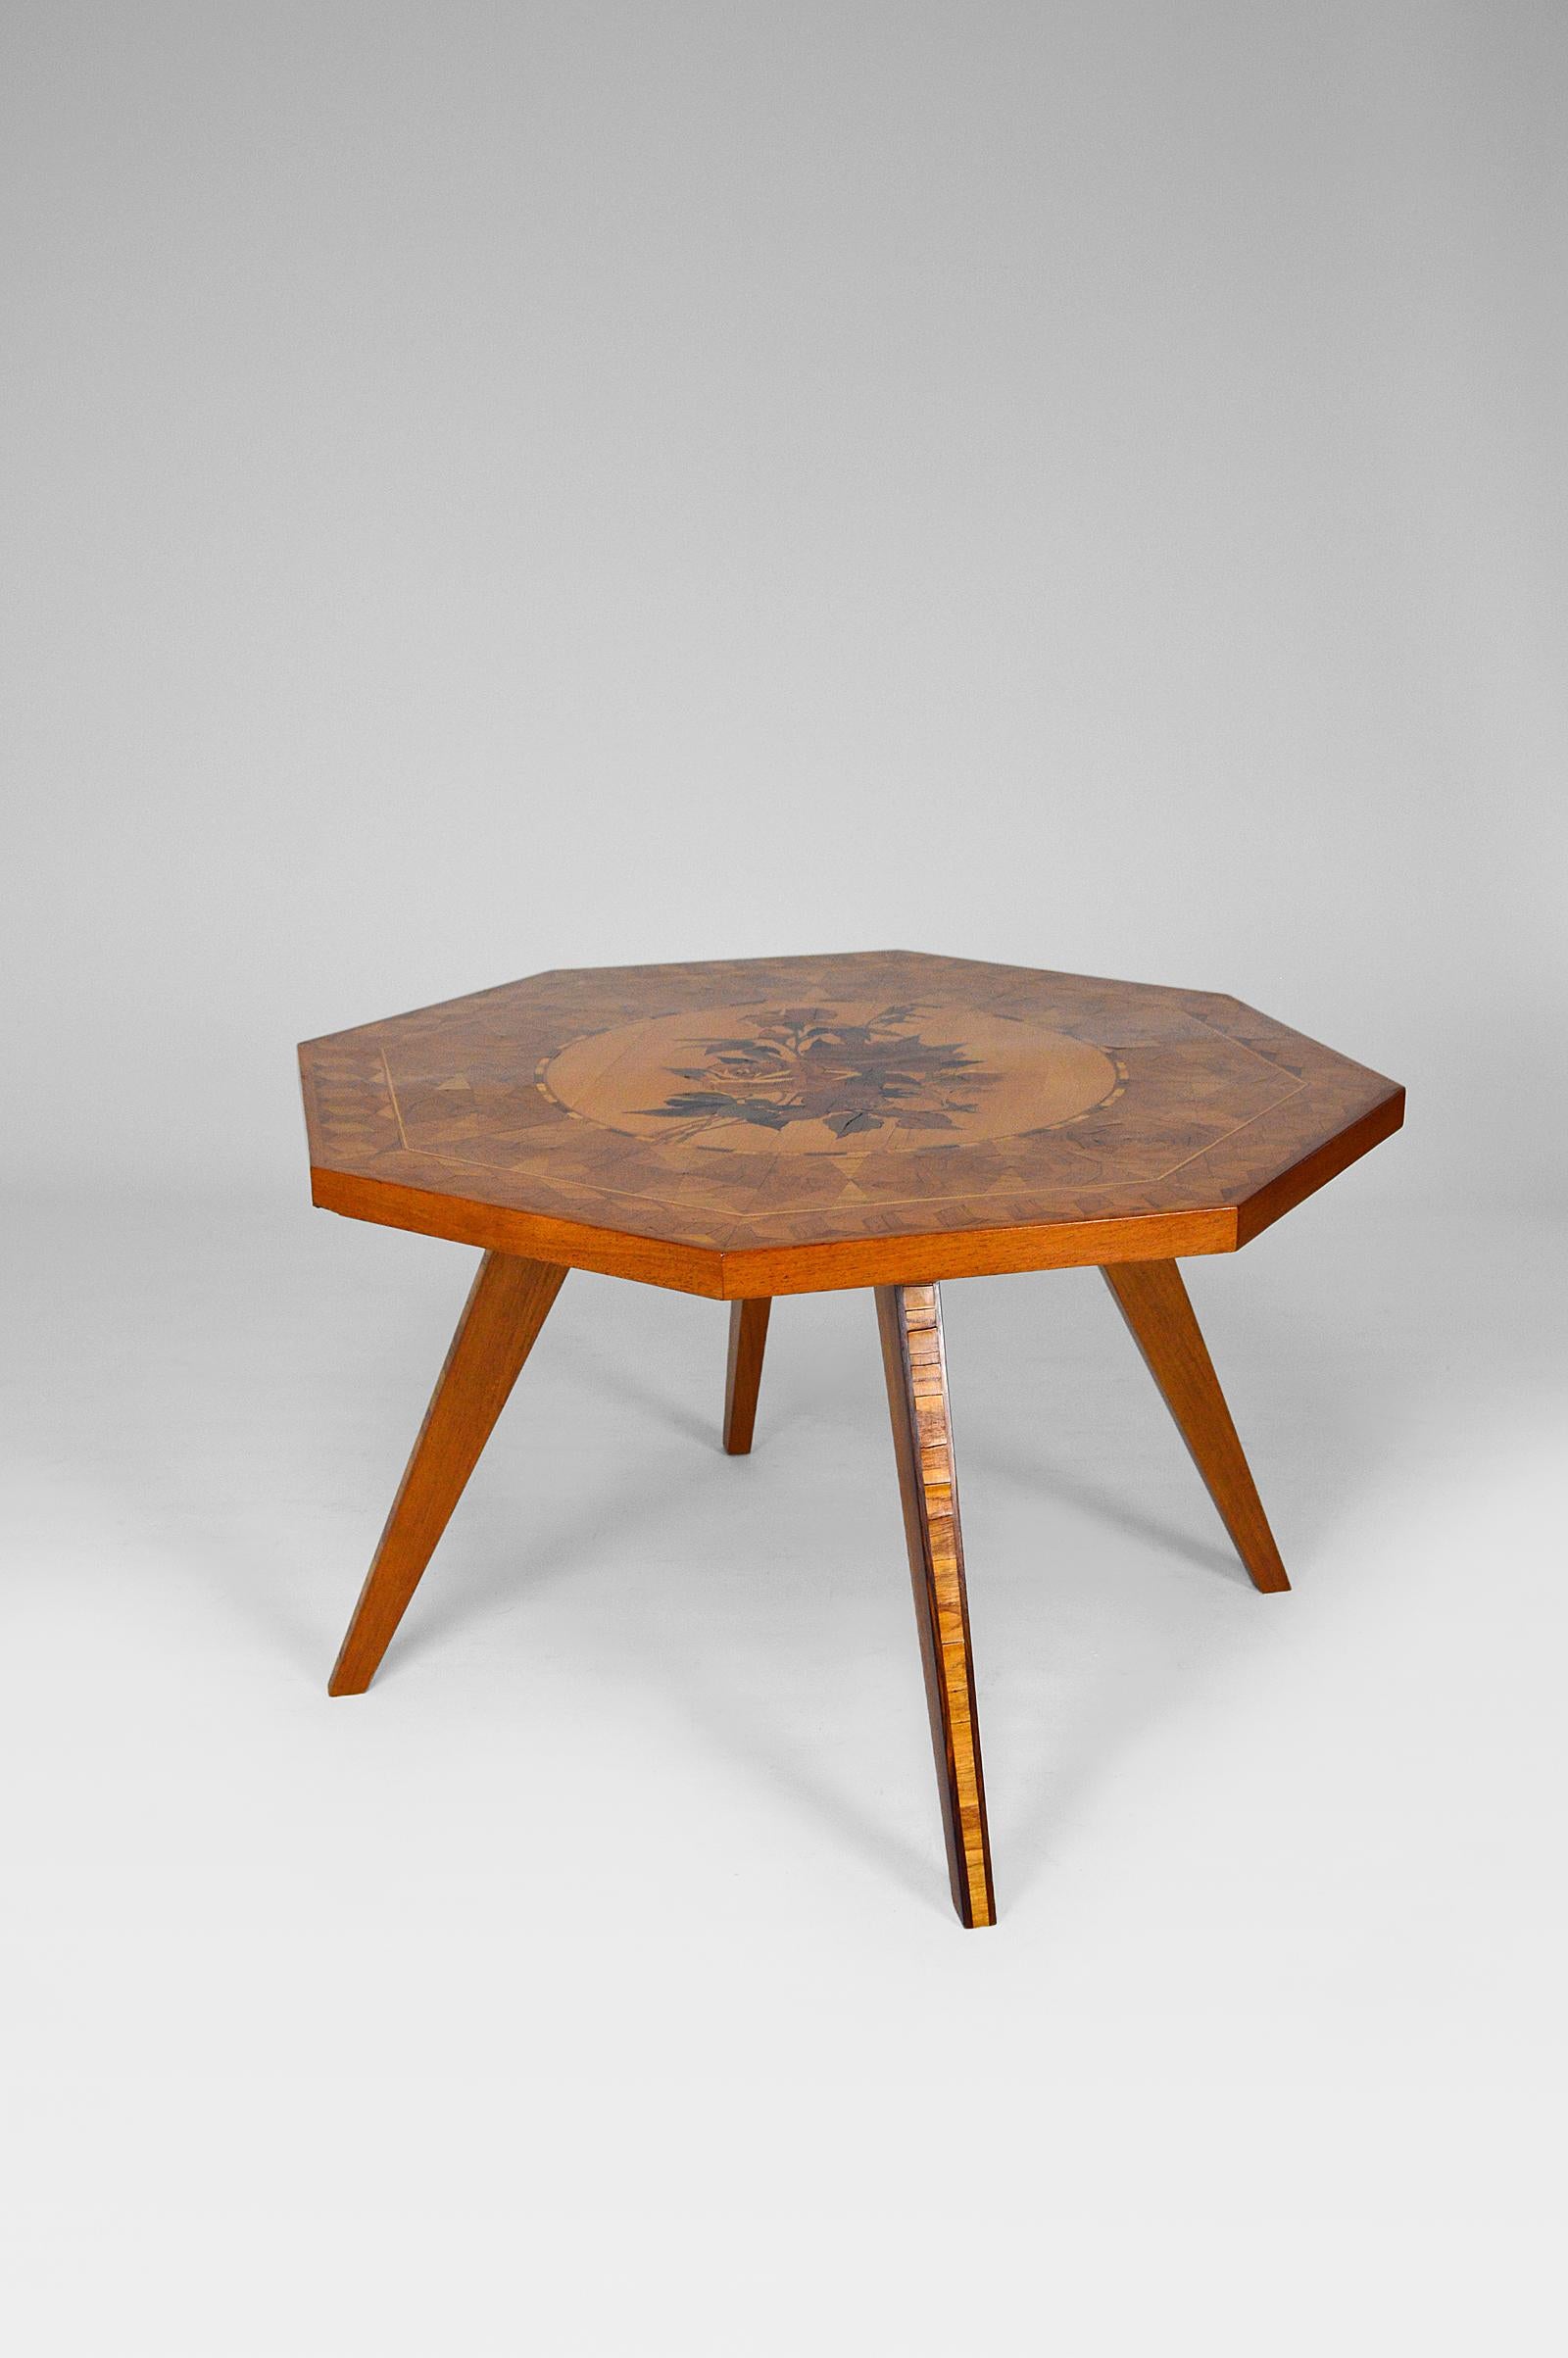 Octagonal Coffee Table with Floral Marquetry Top, Italy, circa 1950 1